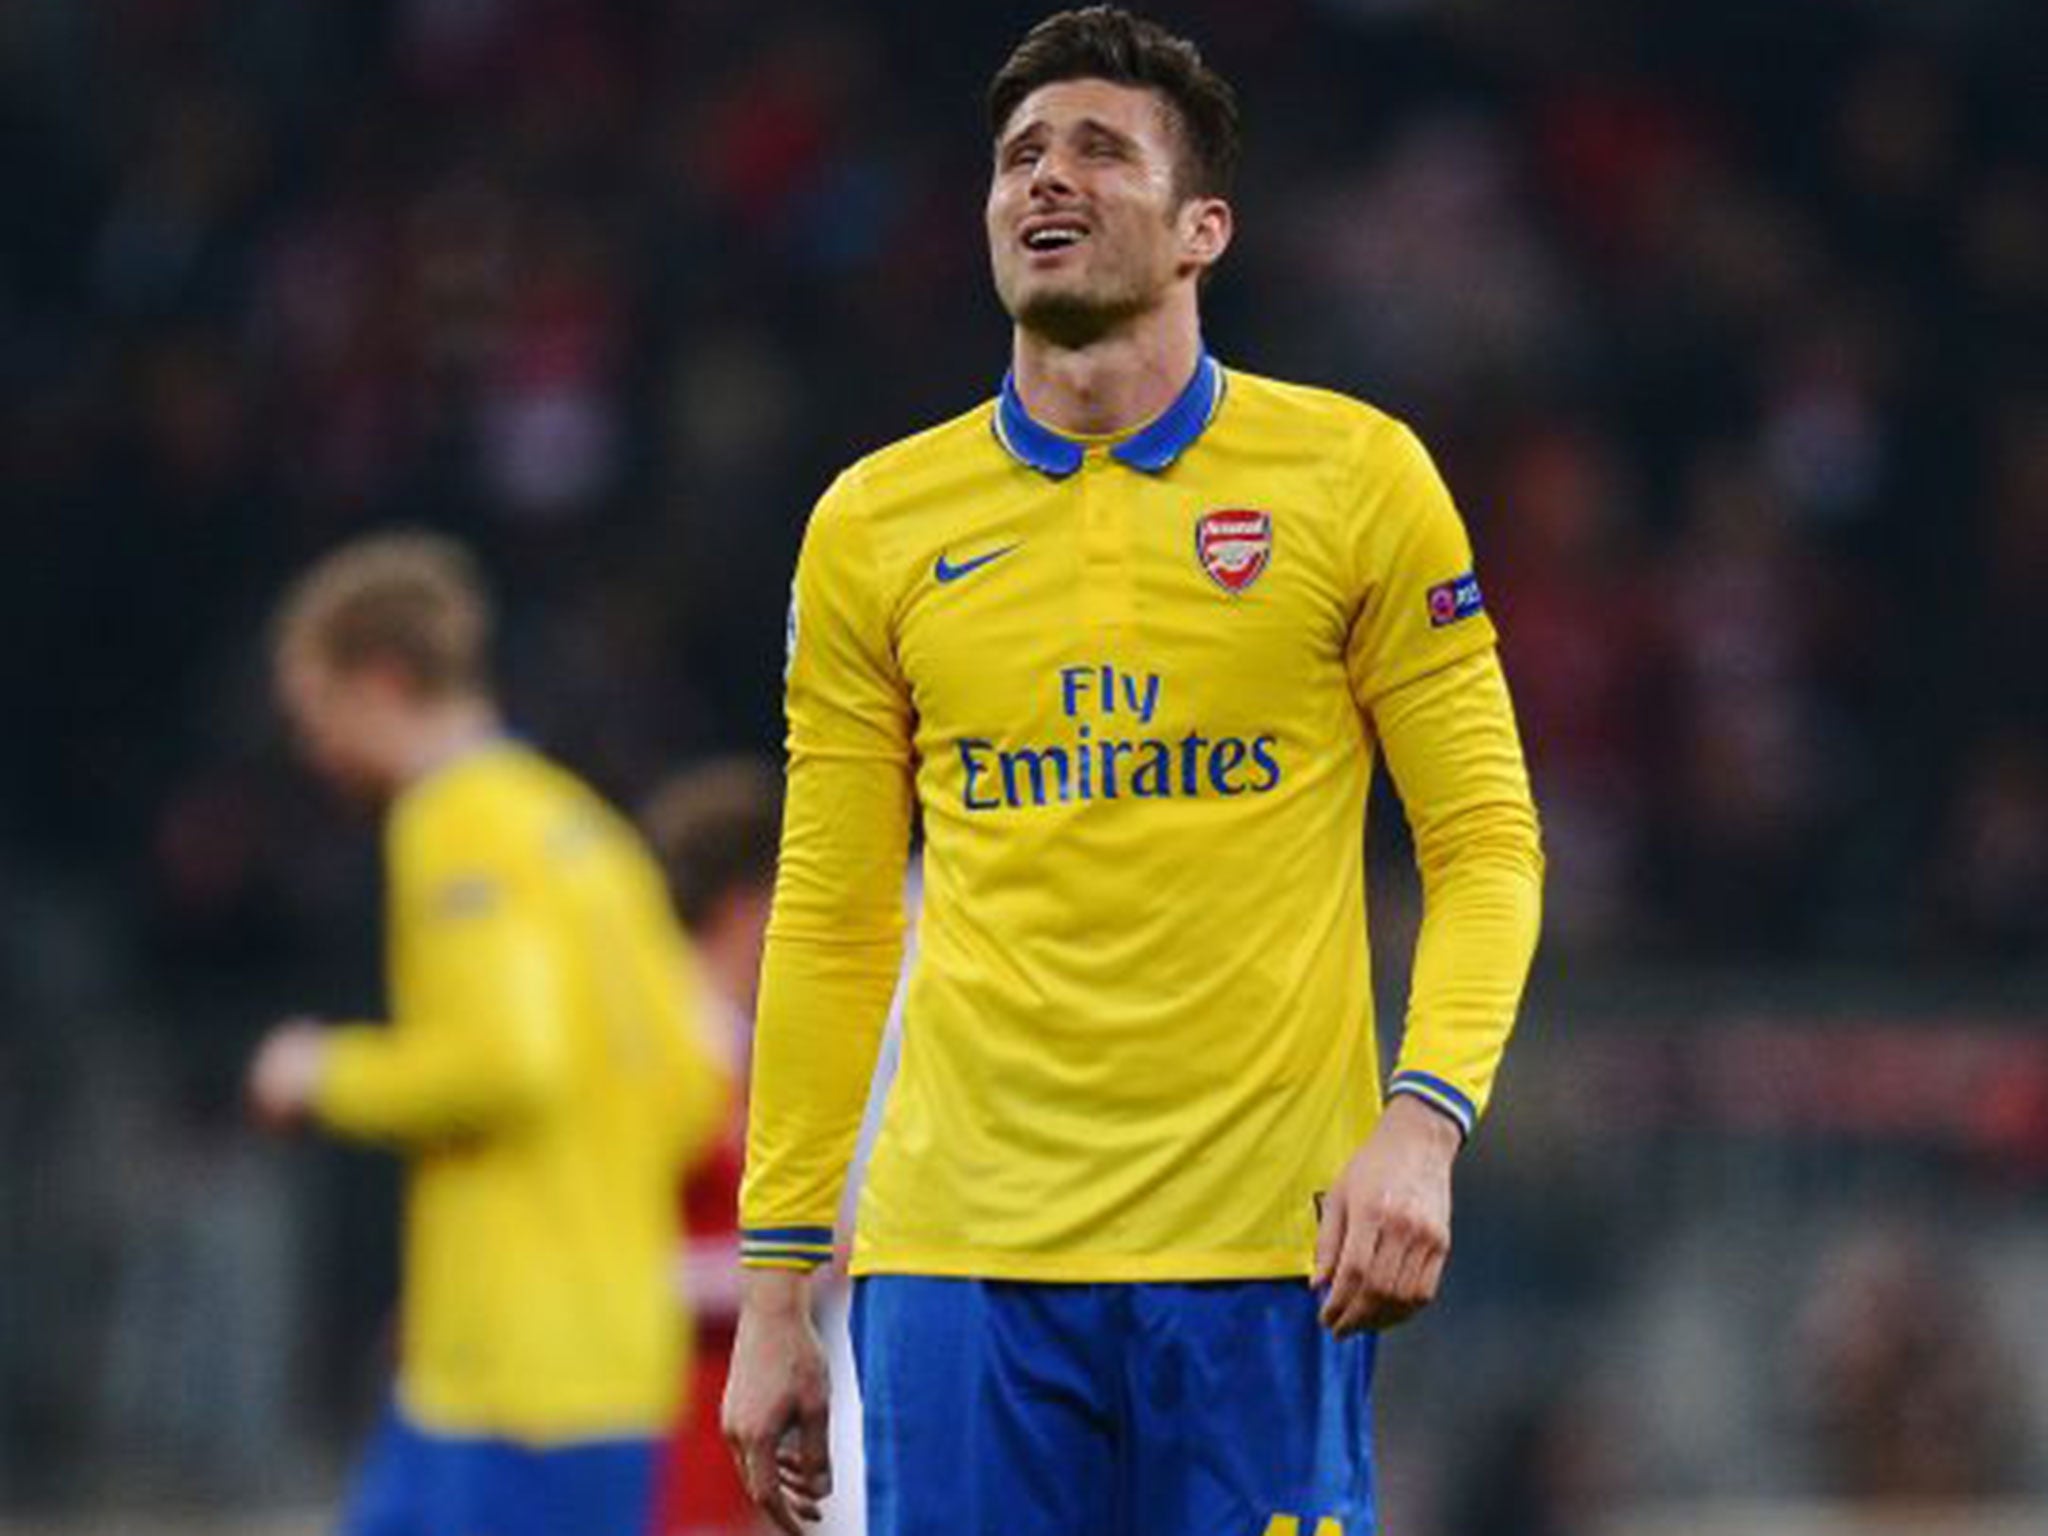 Olivier Giroud has struggled to find form and favour at Arsenal all season